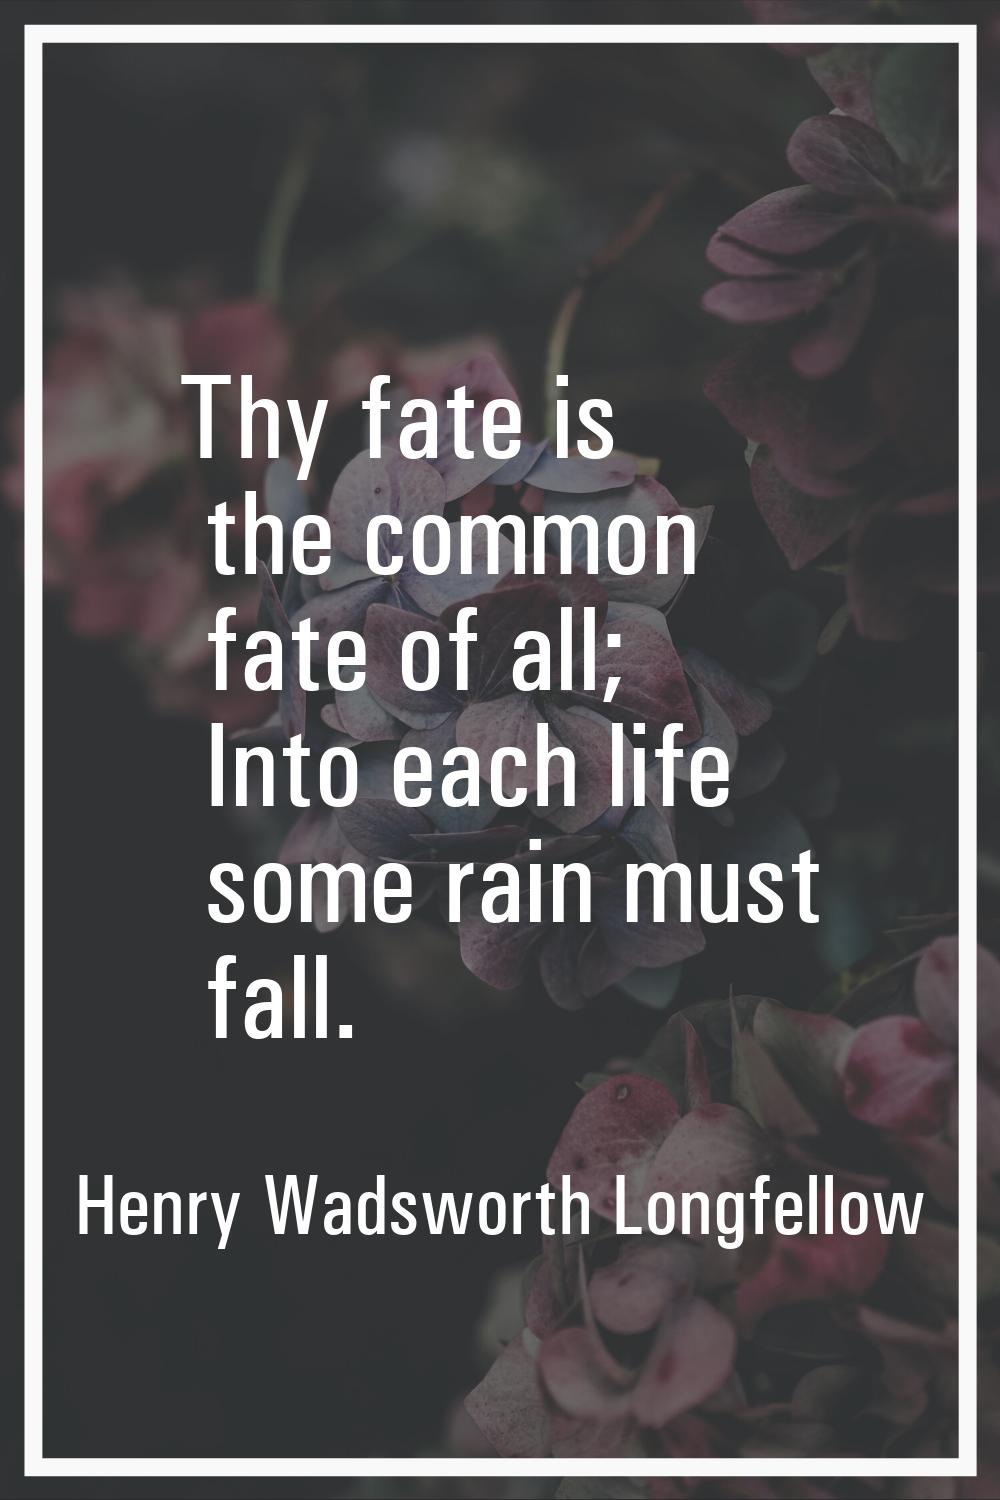 Thy fate is the common fate of all; Into each life some rain must fall.